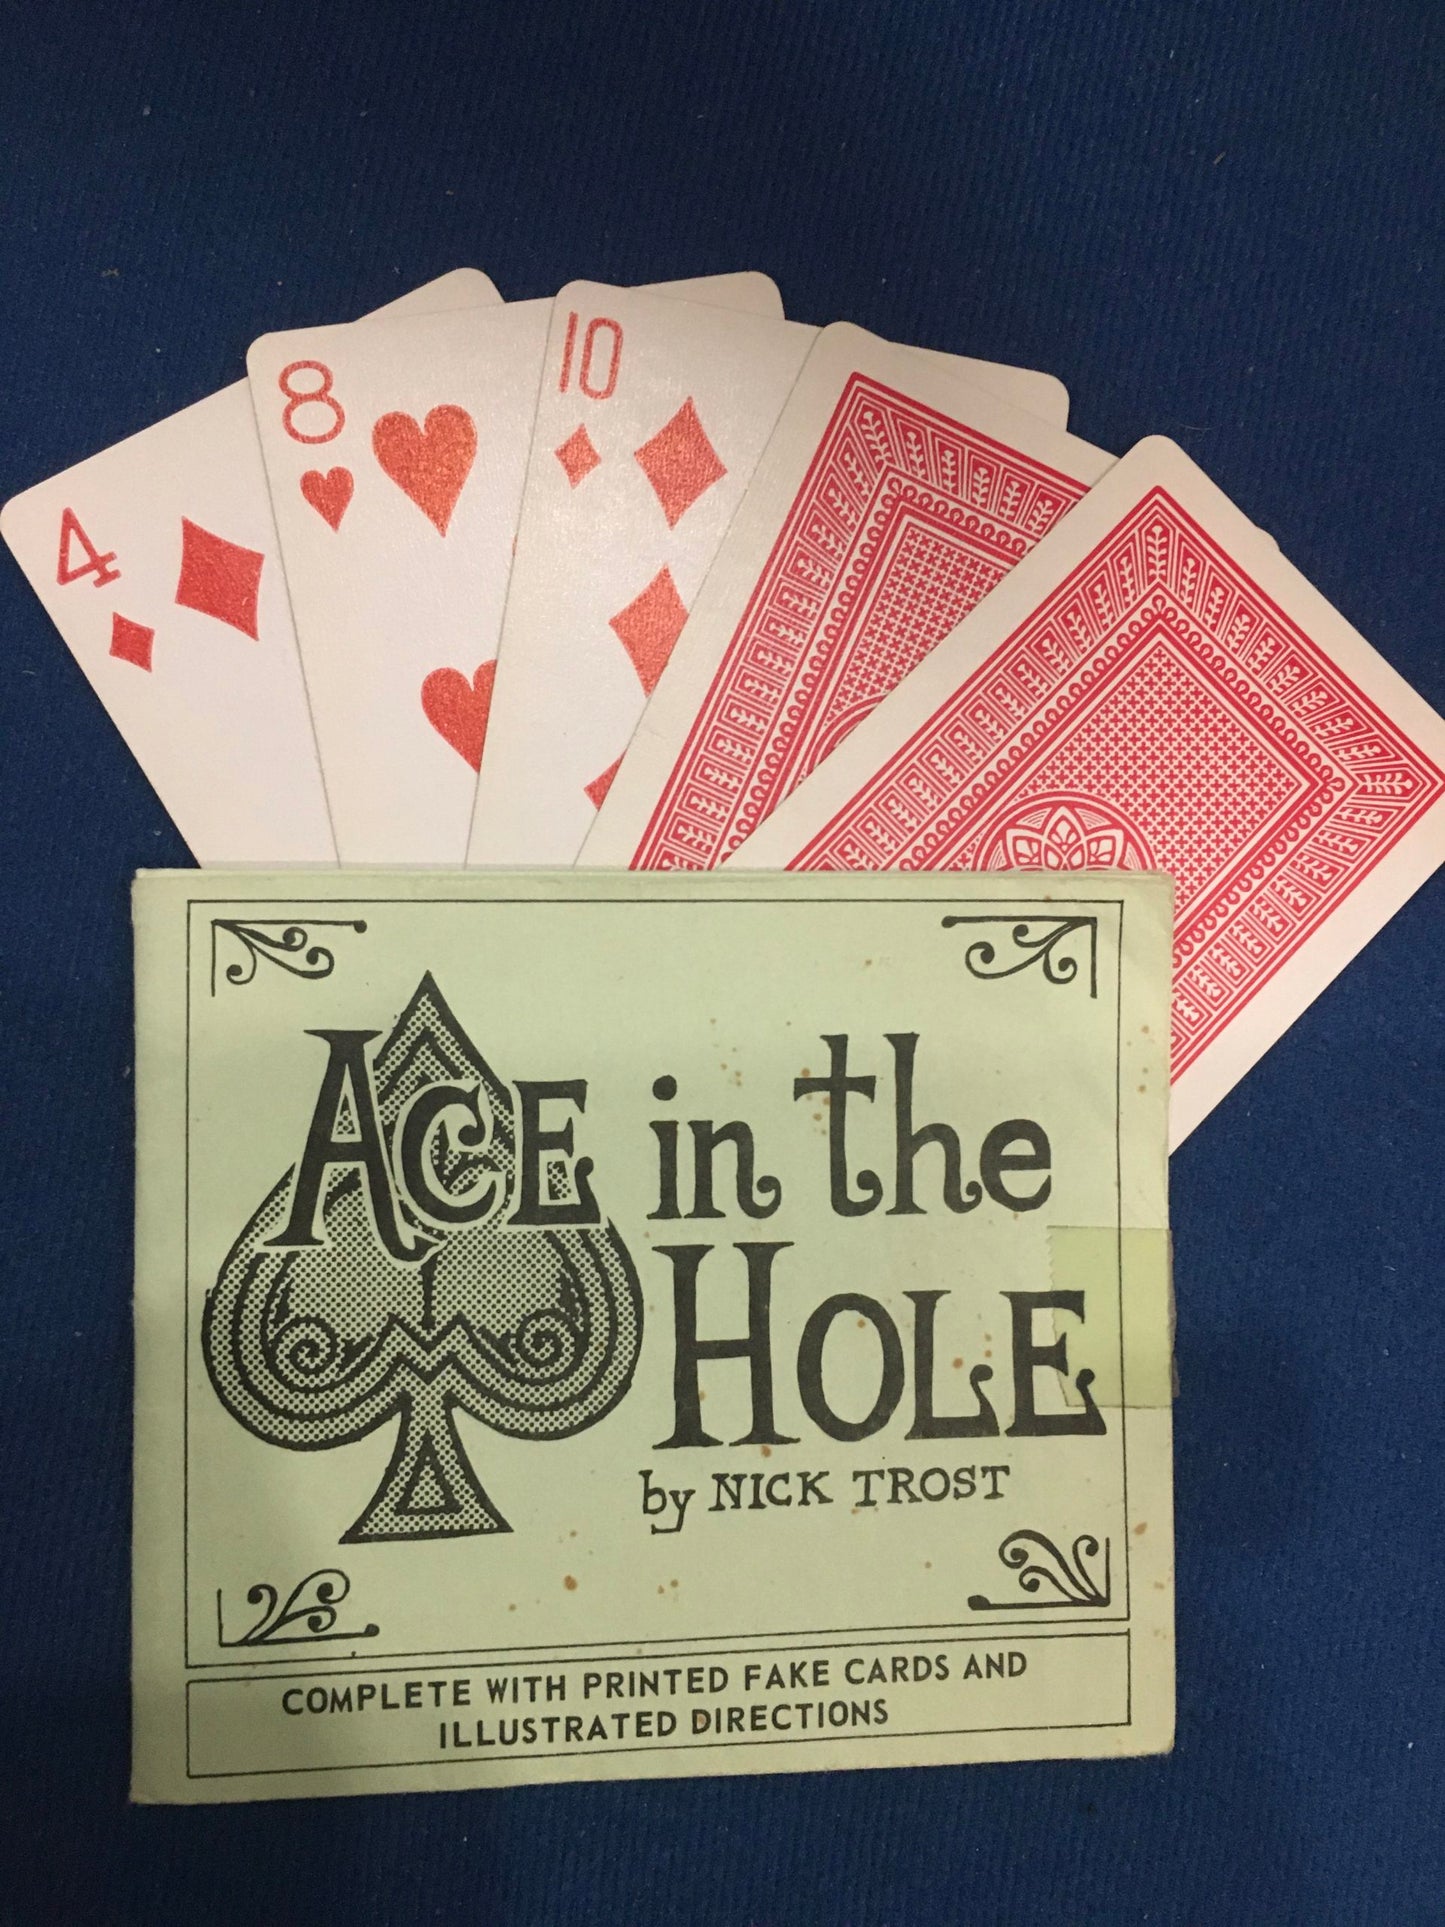 Ace in the Hole, Nick Trost, used